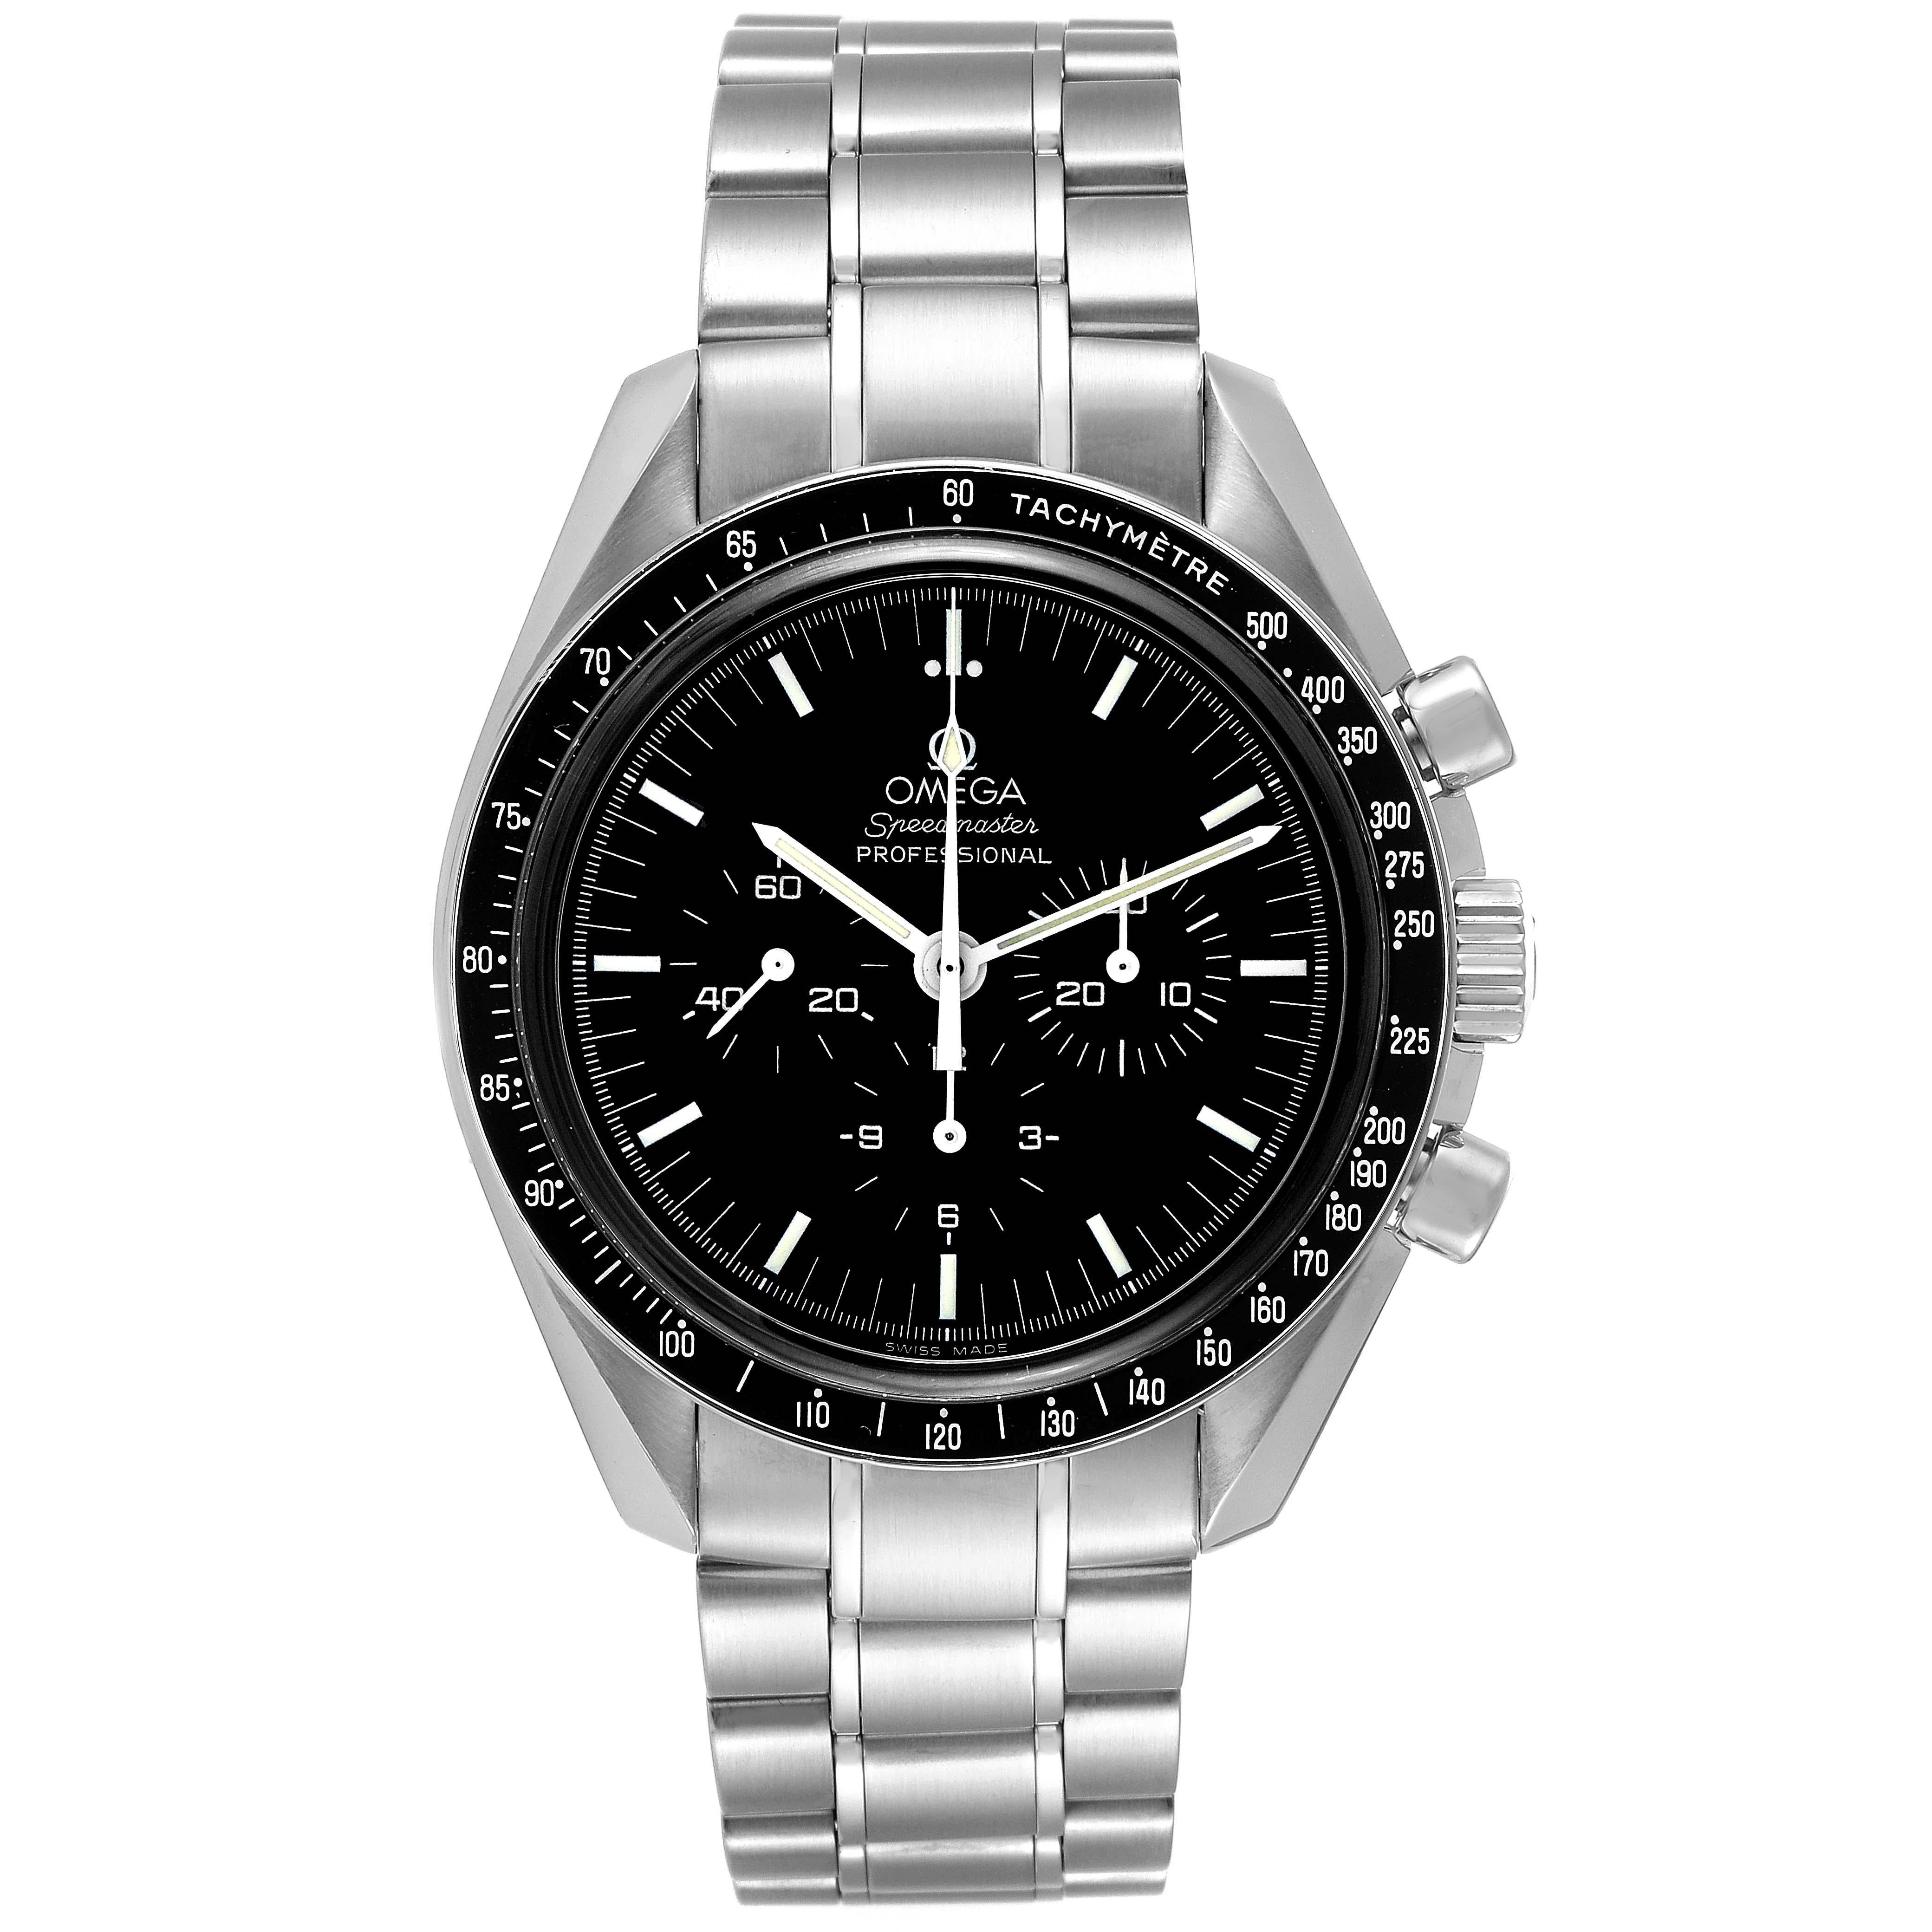 Omega Speedmaster Sapphire Sandwich Steel Mens MoonWatch 3573.50.00 Box Card. Manual winding chronograph movement. Caliber 1863. Stainless steel round case 42.0 mm in diameter. Transparent exhibition sapphire crystal caseback. Stainless steel bezel